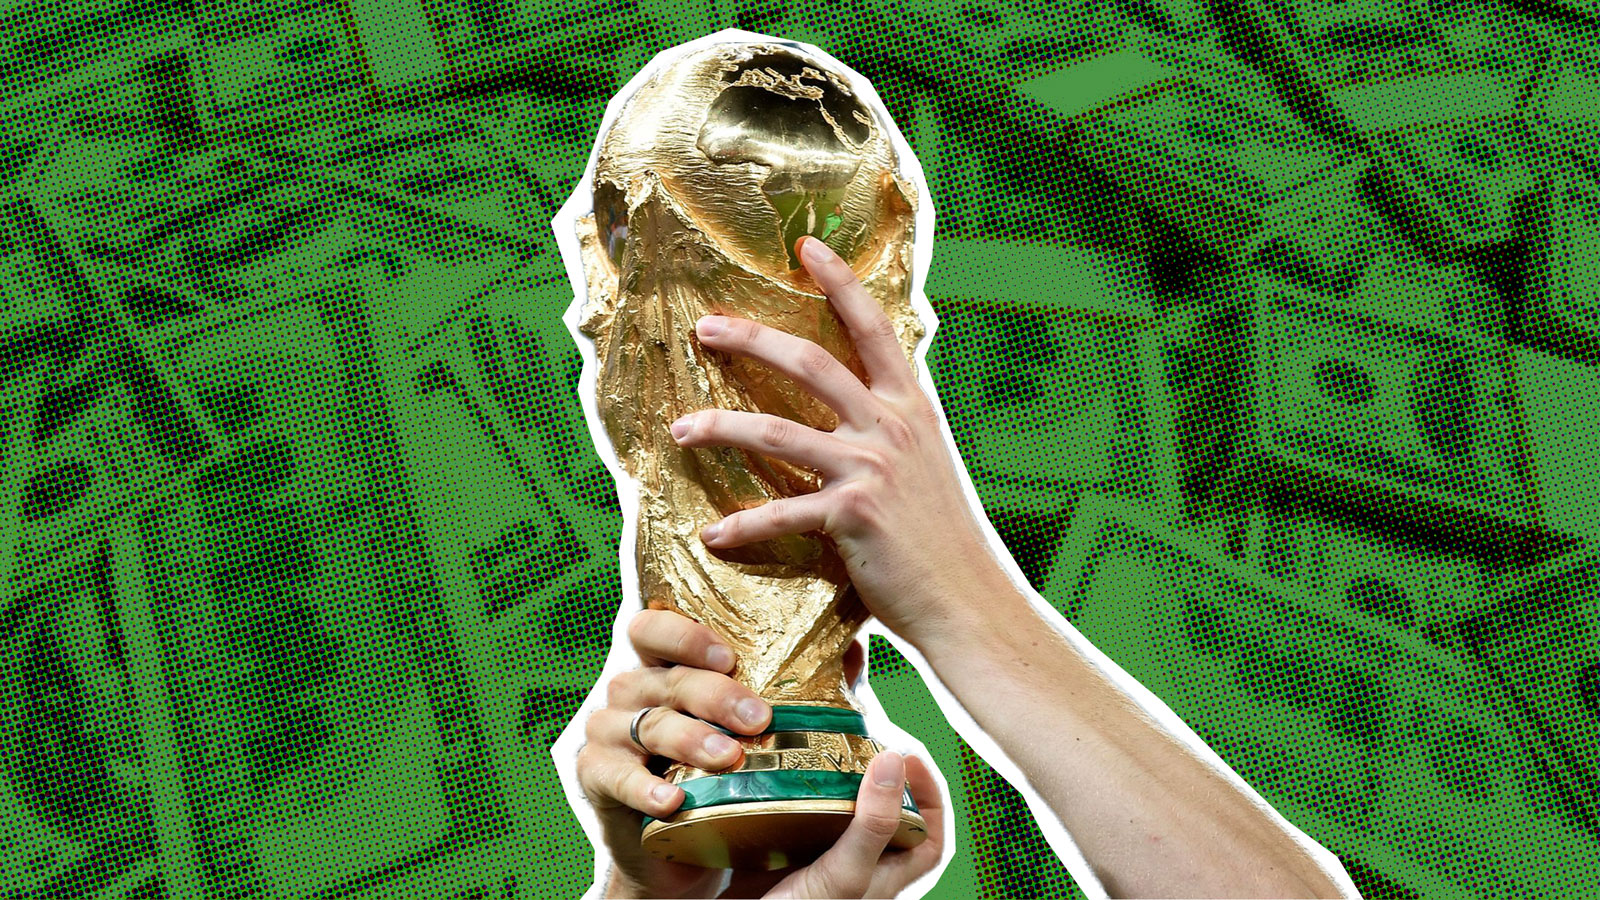 FIFA World Cup Prize Money 2022: How Much Will Winners Get?